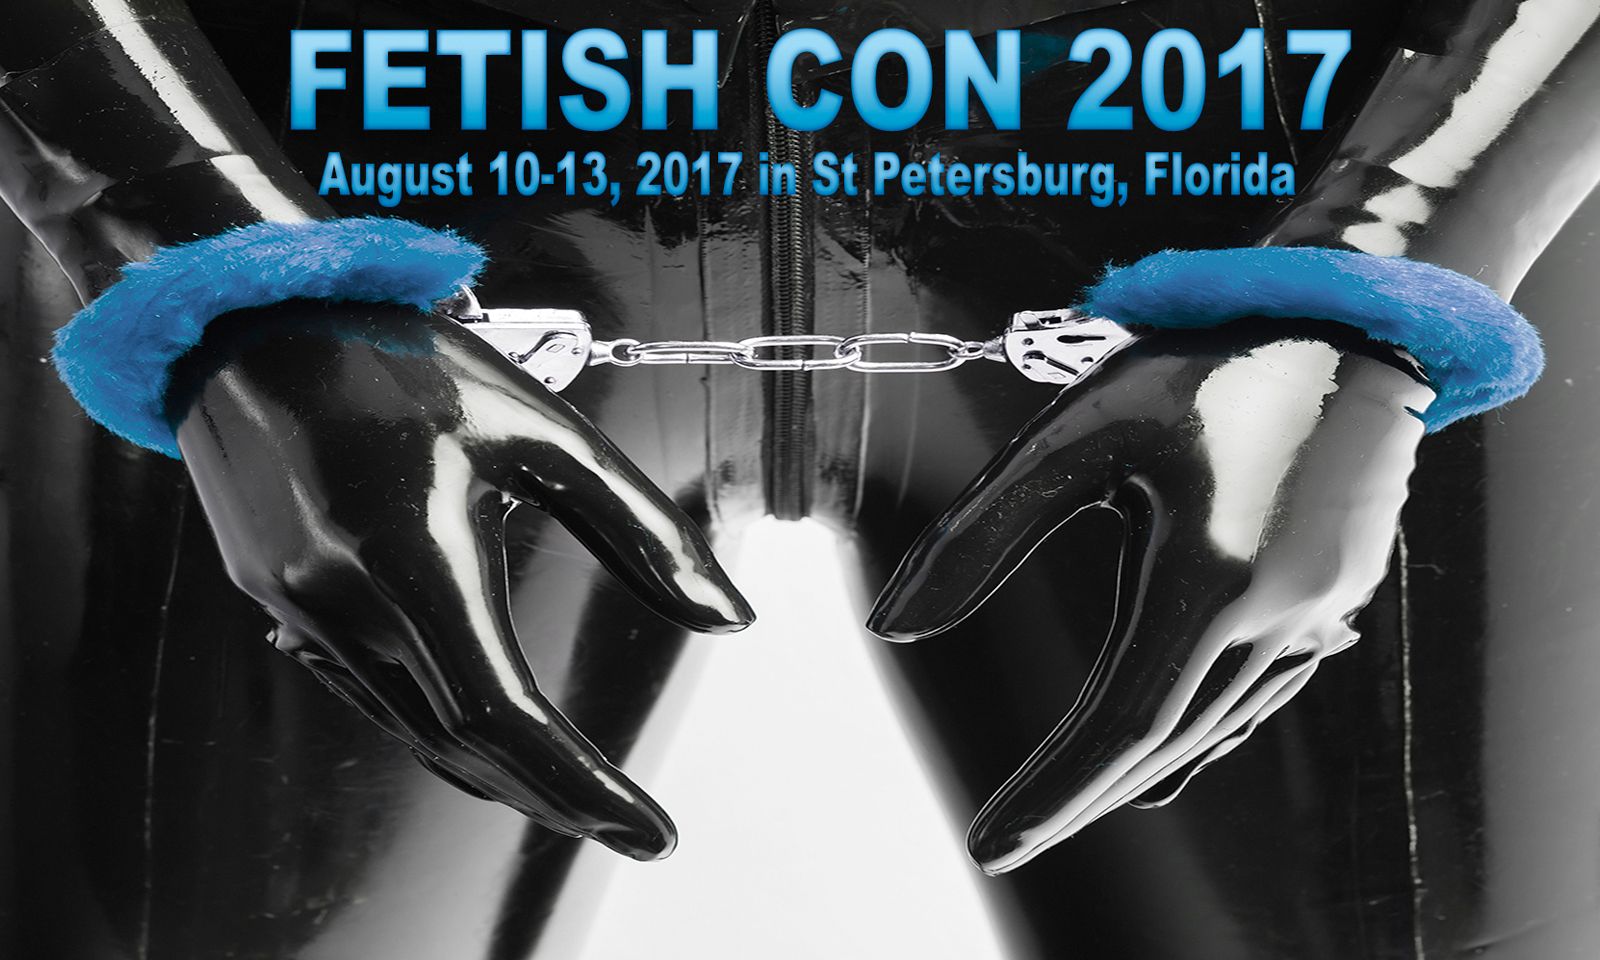 Fetish Con Host Hotel, Booths Sold Out For 2017 Show